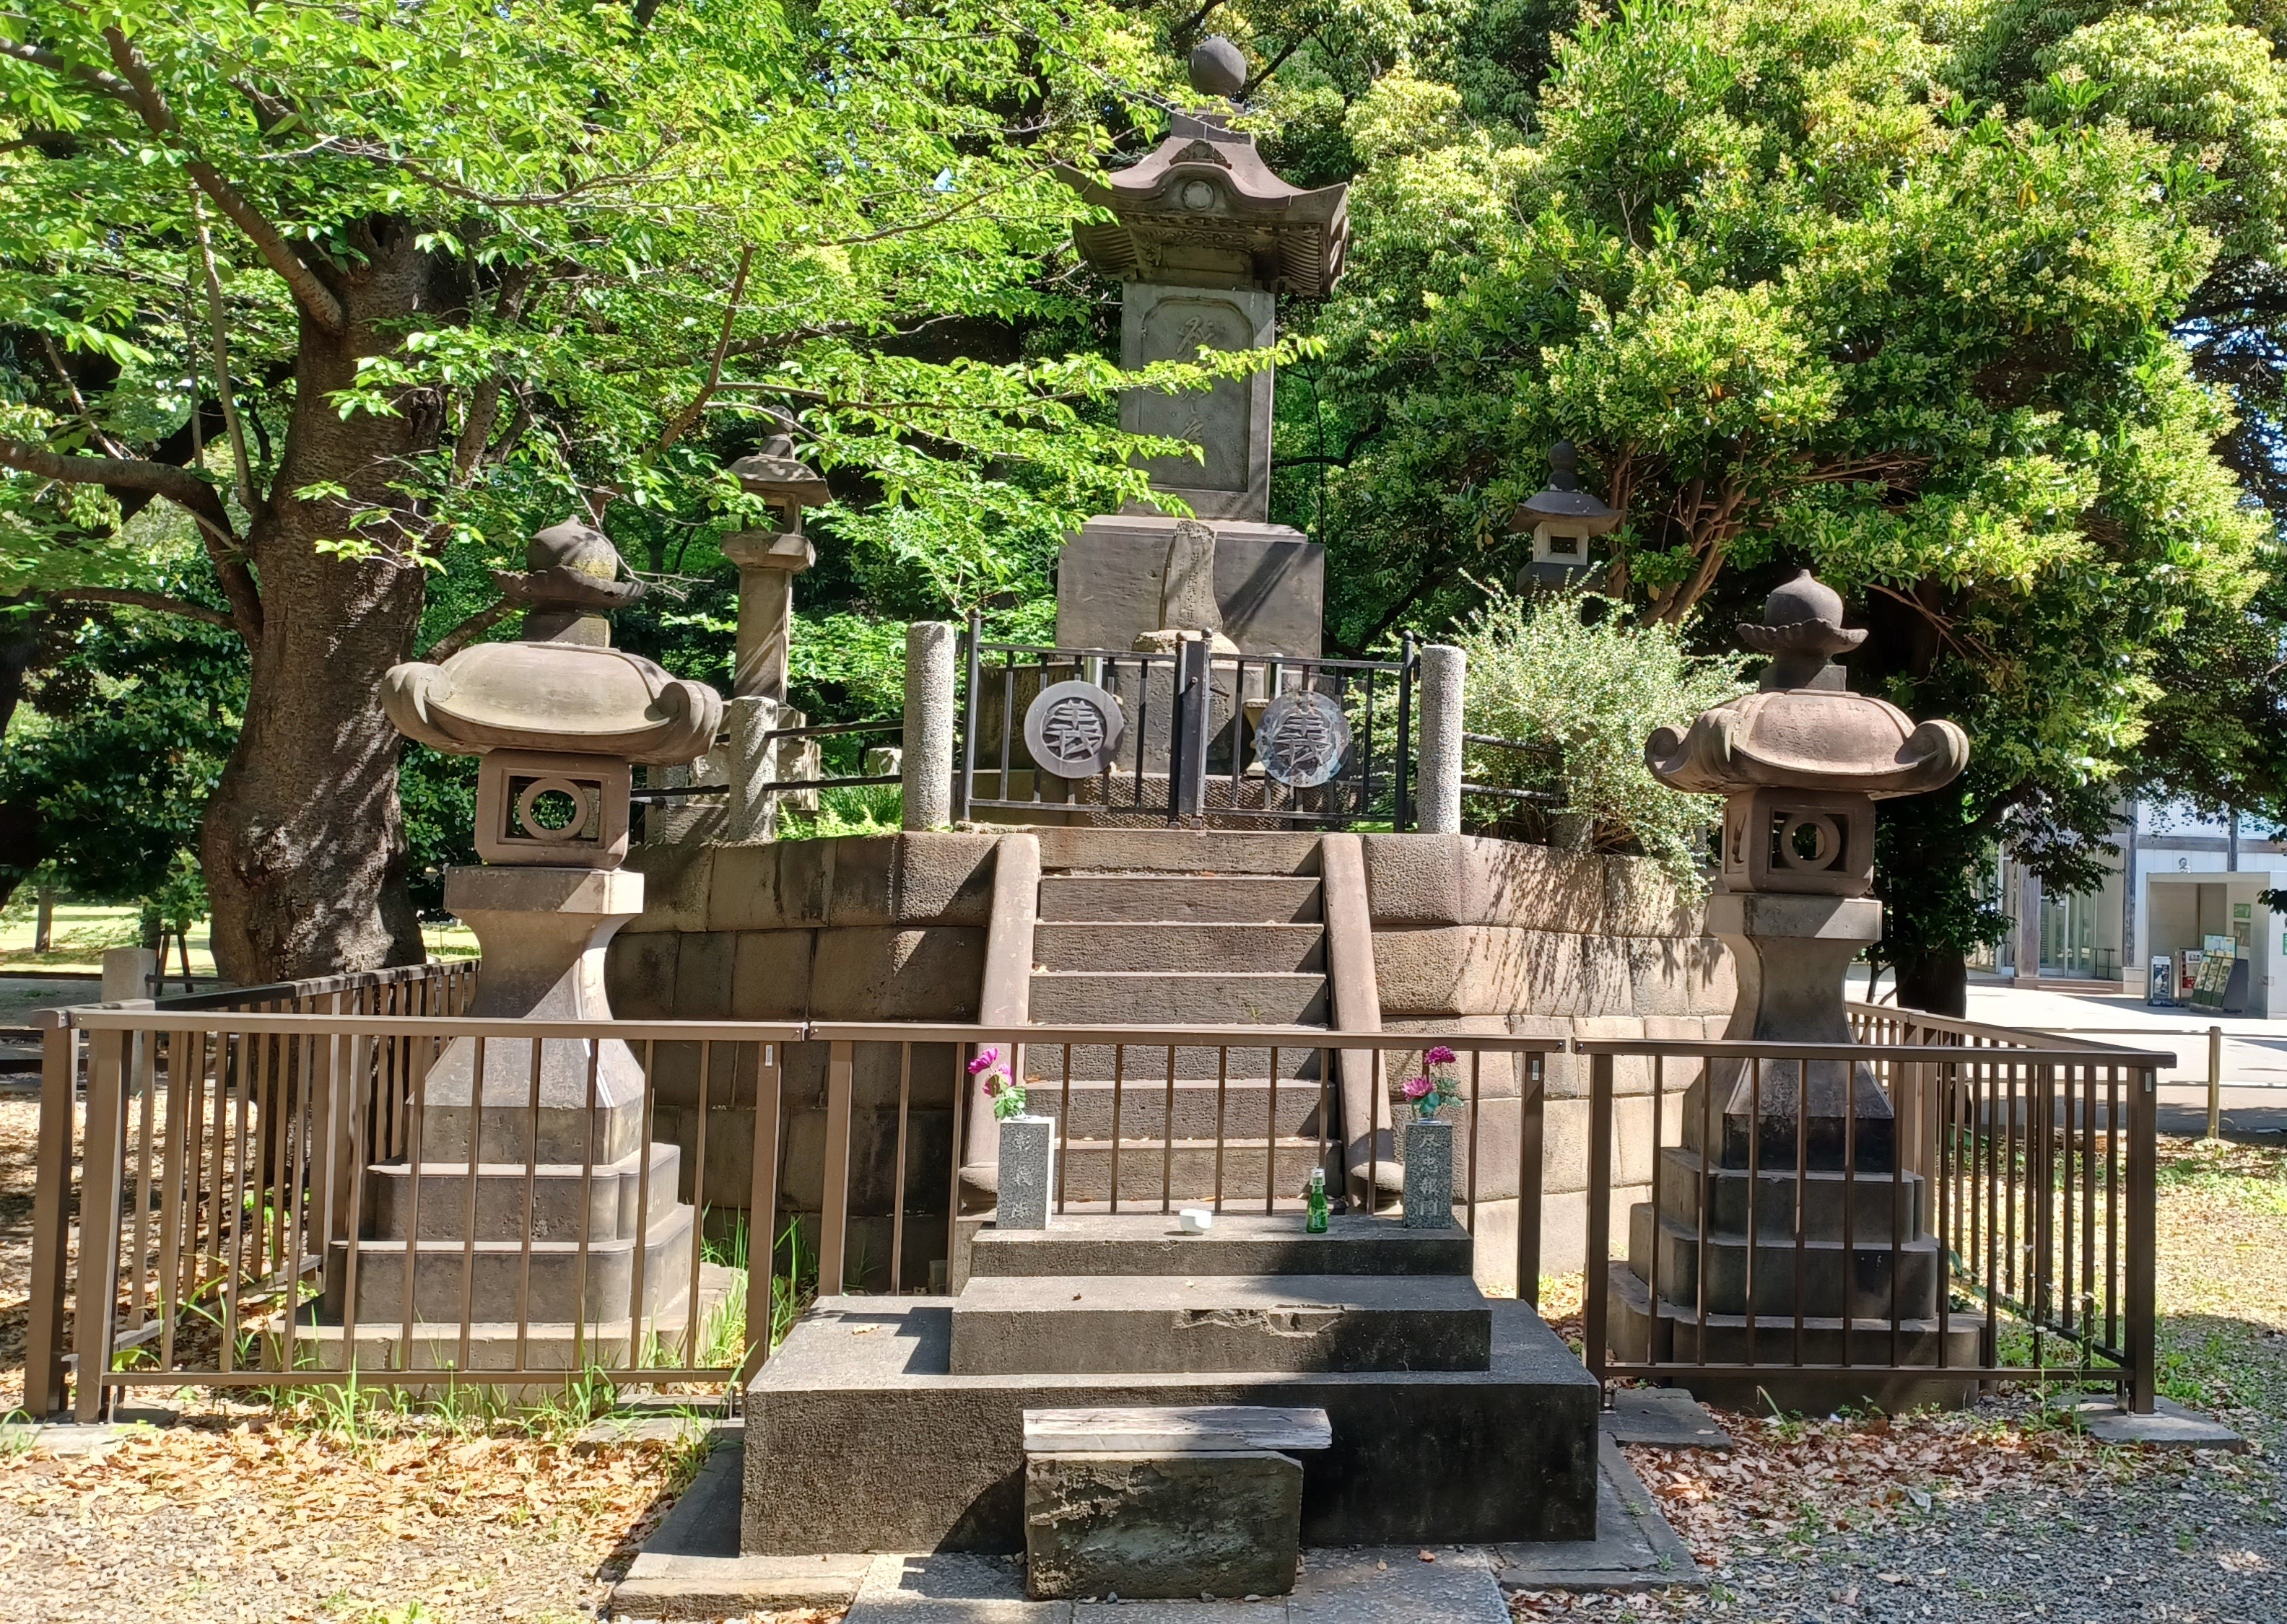 A stone memorial site, with a few stairs leading up to a large gated stone lantern. There are smaller stone lanterns around it and trees in the background. There's a wider gate protecting the site in the front. 4 stones squares are in front of the gate and flowers in a vase on the left and right side.